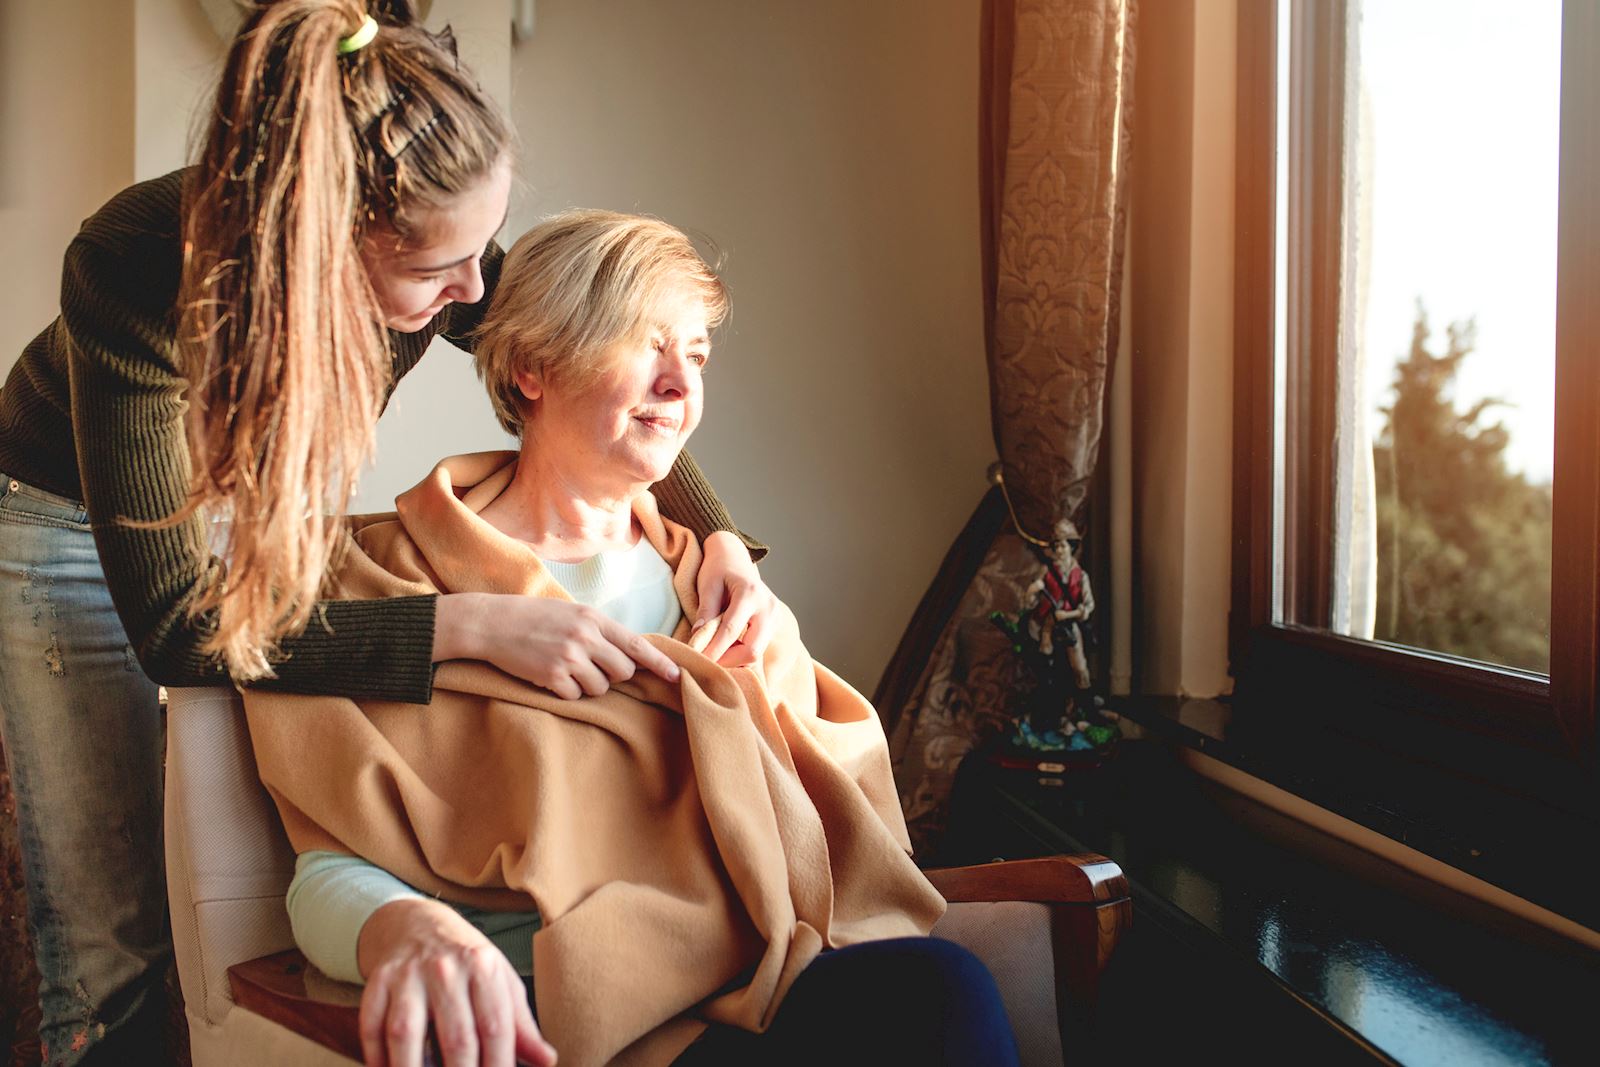 How to care for a loved one with dementia